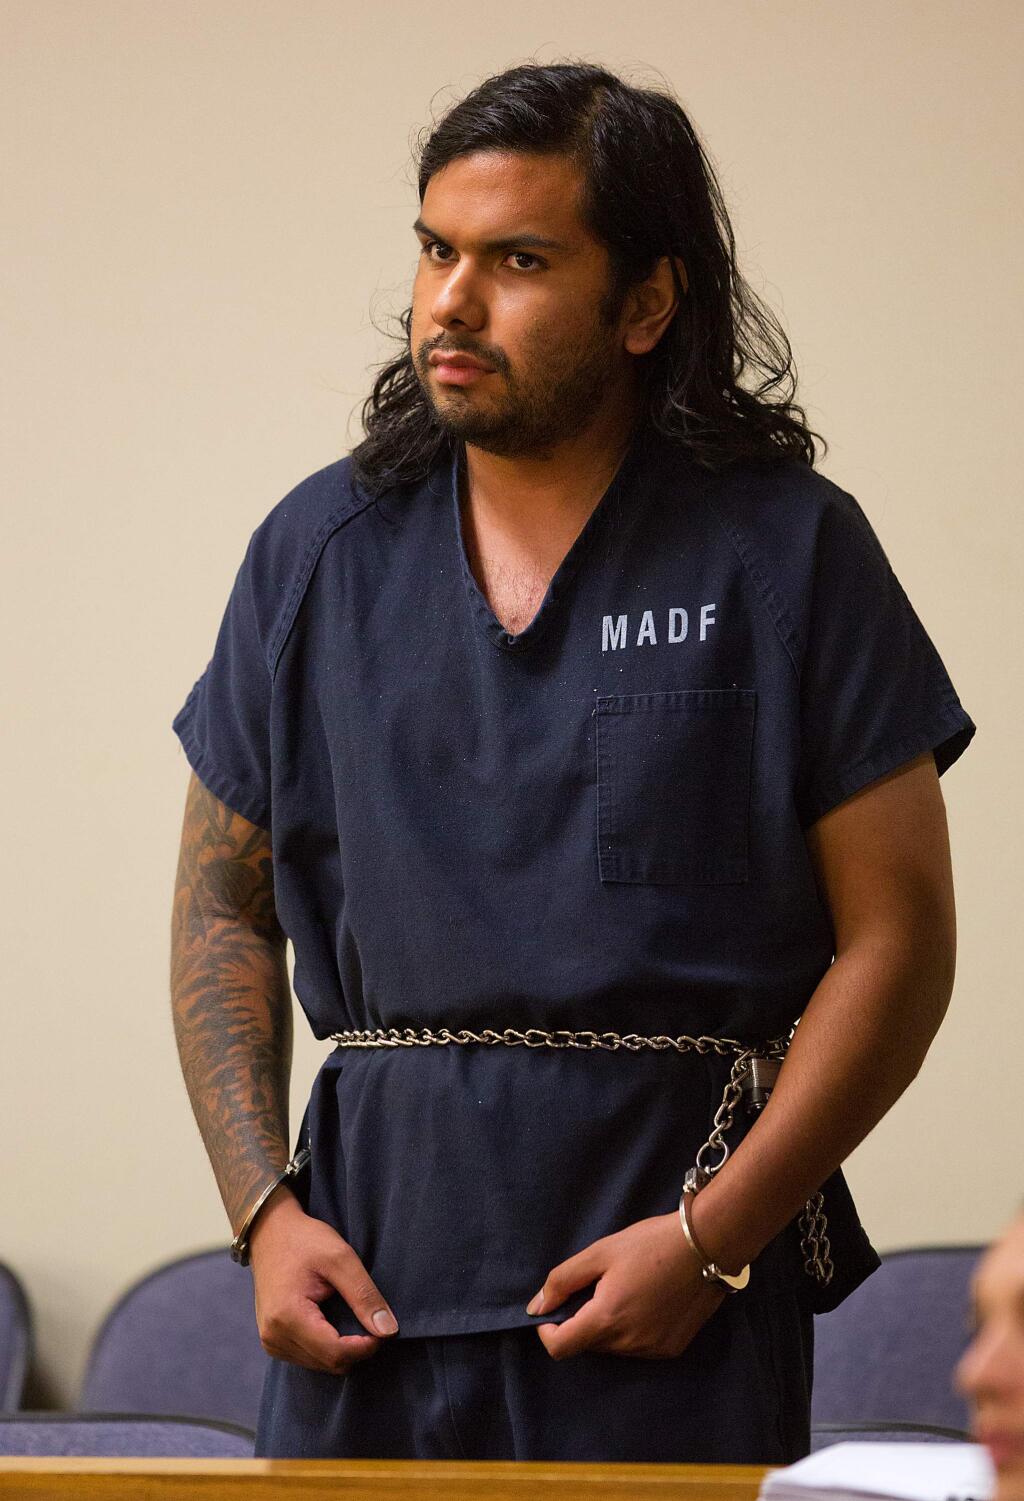 Ivan Morales, 23, of Lakeport appeared in Sonoma County Superior court on attempted murder, robbery and conspiracy charges stemming from the Tuesday robbery outside the Chase bank branch at the Safeway Lakewood shopping center in east Windsor. (JOHN BURGESS/The Press Democrat)